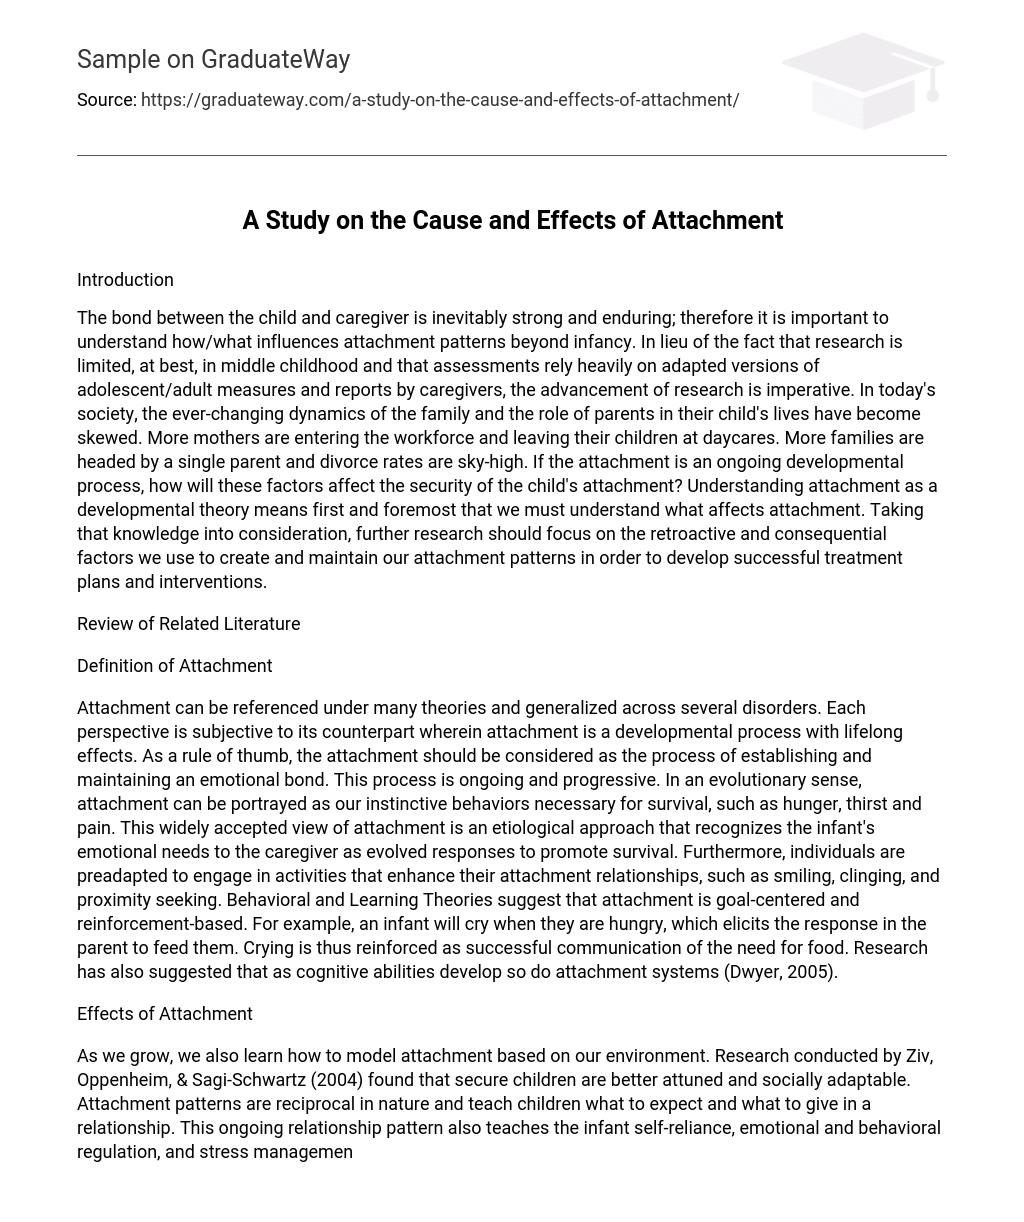 A Study on the Cause and Effects of Attachment